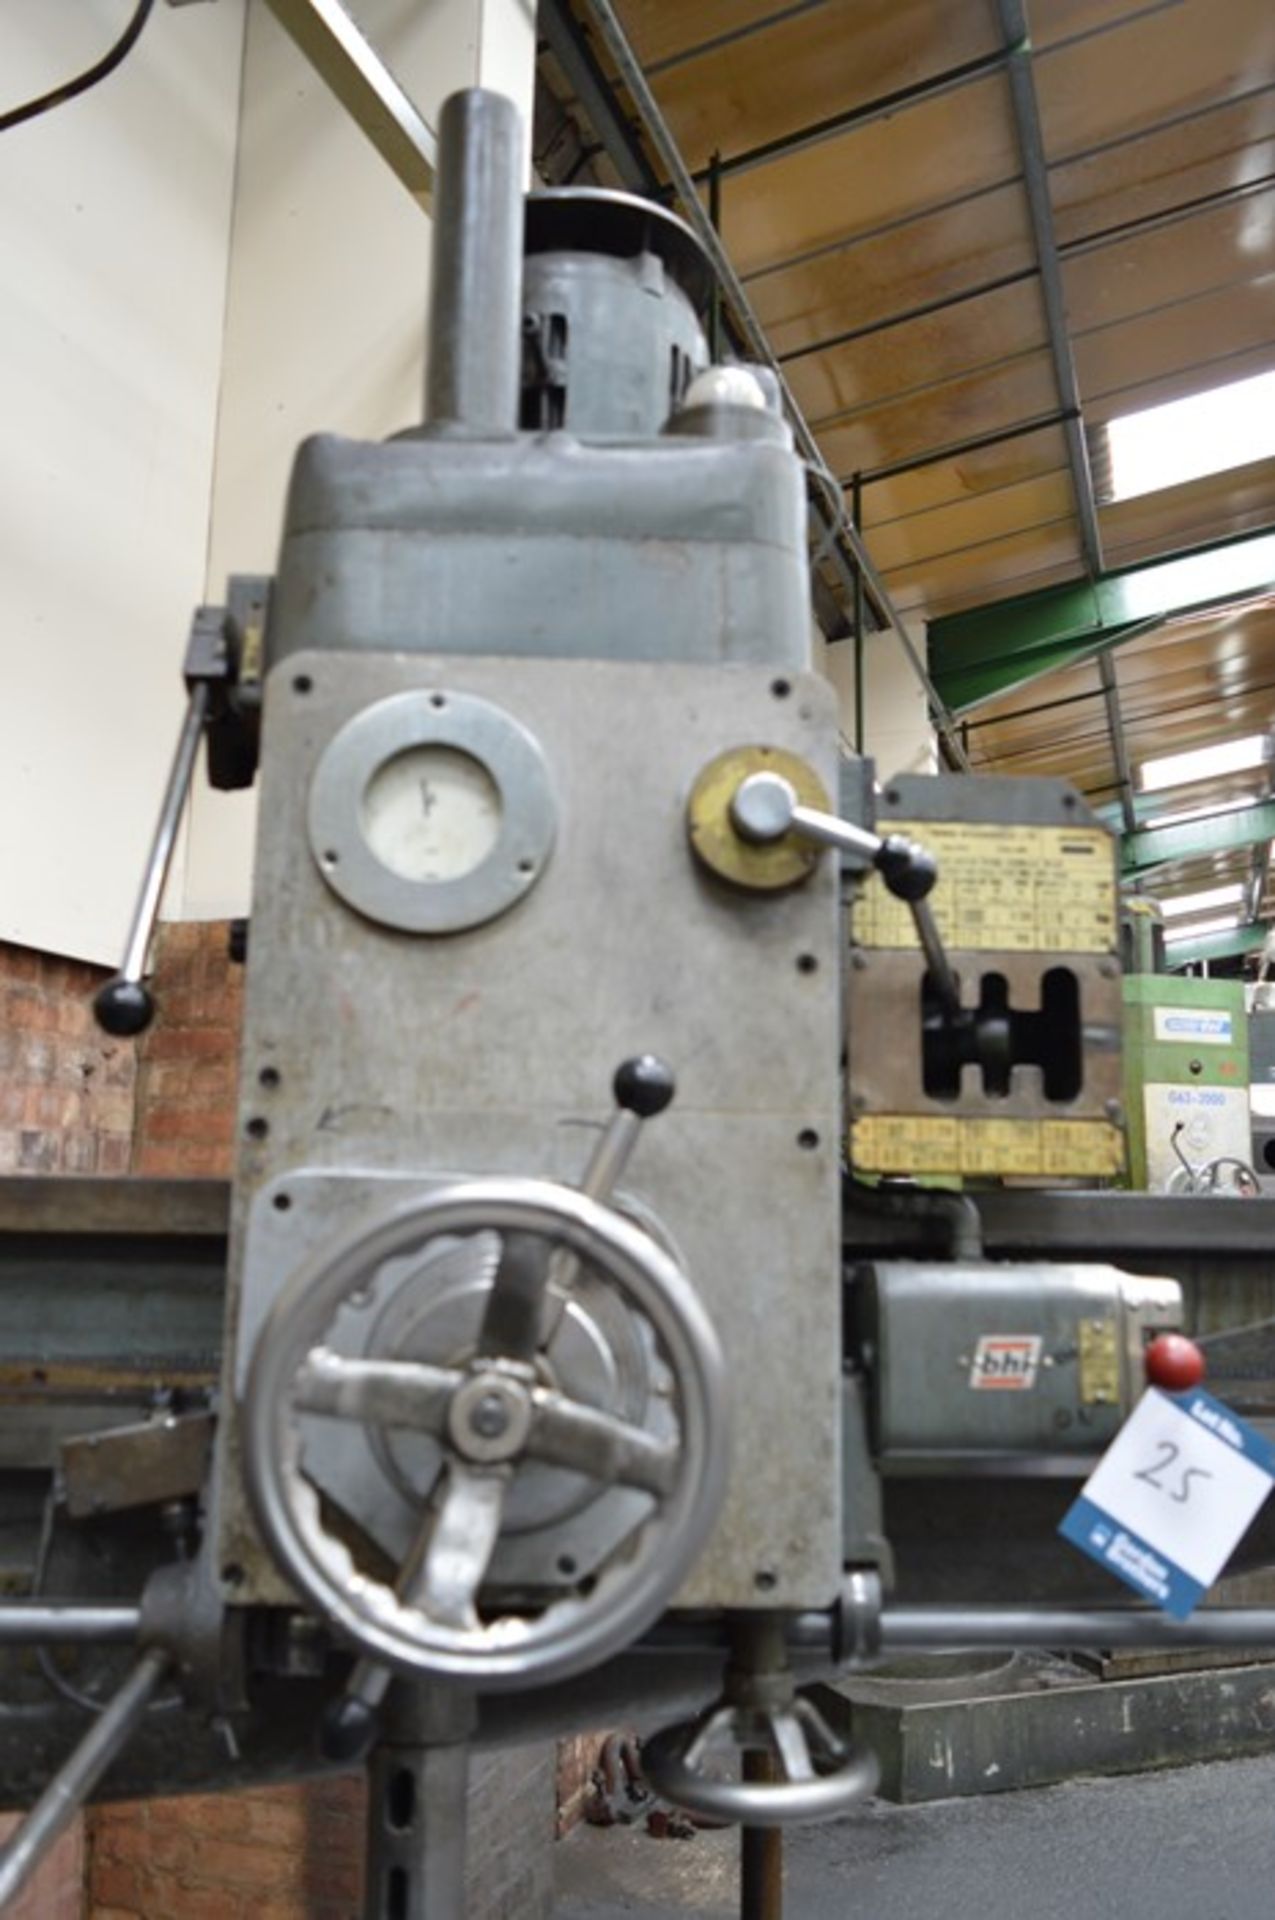 Town Woodhouse, AE4 radial arm drill, Machine No. 38998, bed size: 0.92m x 0.61m (Risk Assessment - Image 4 of 5